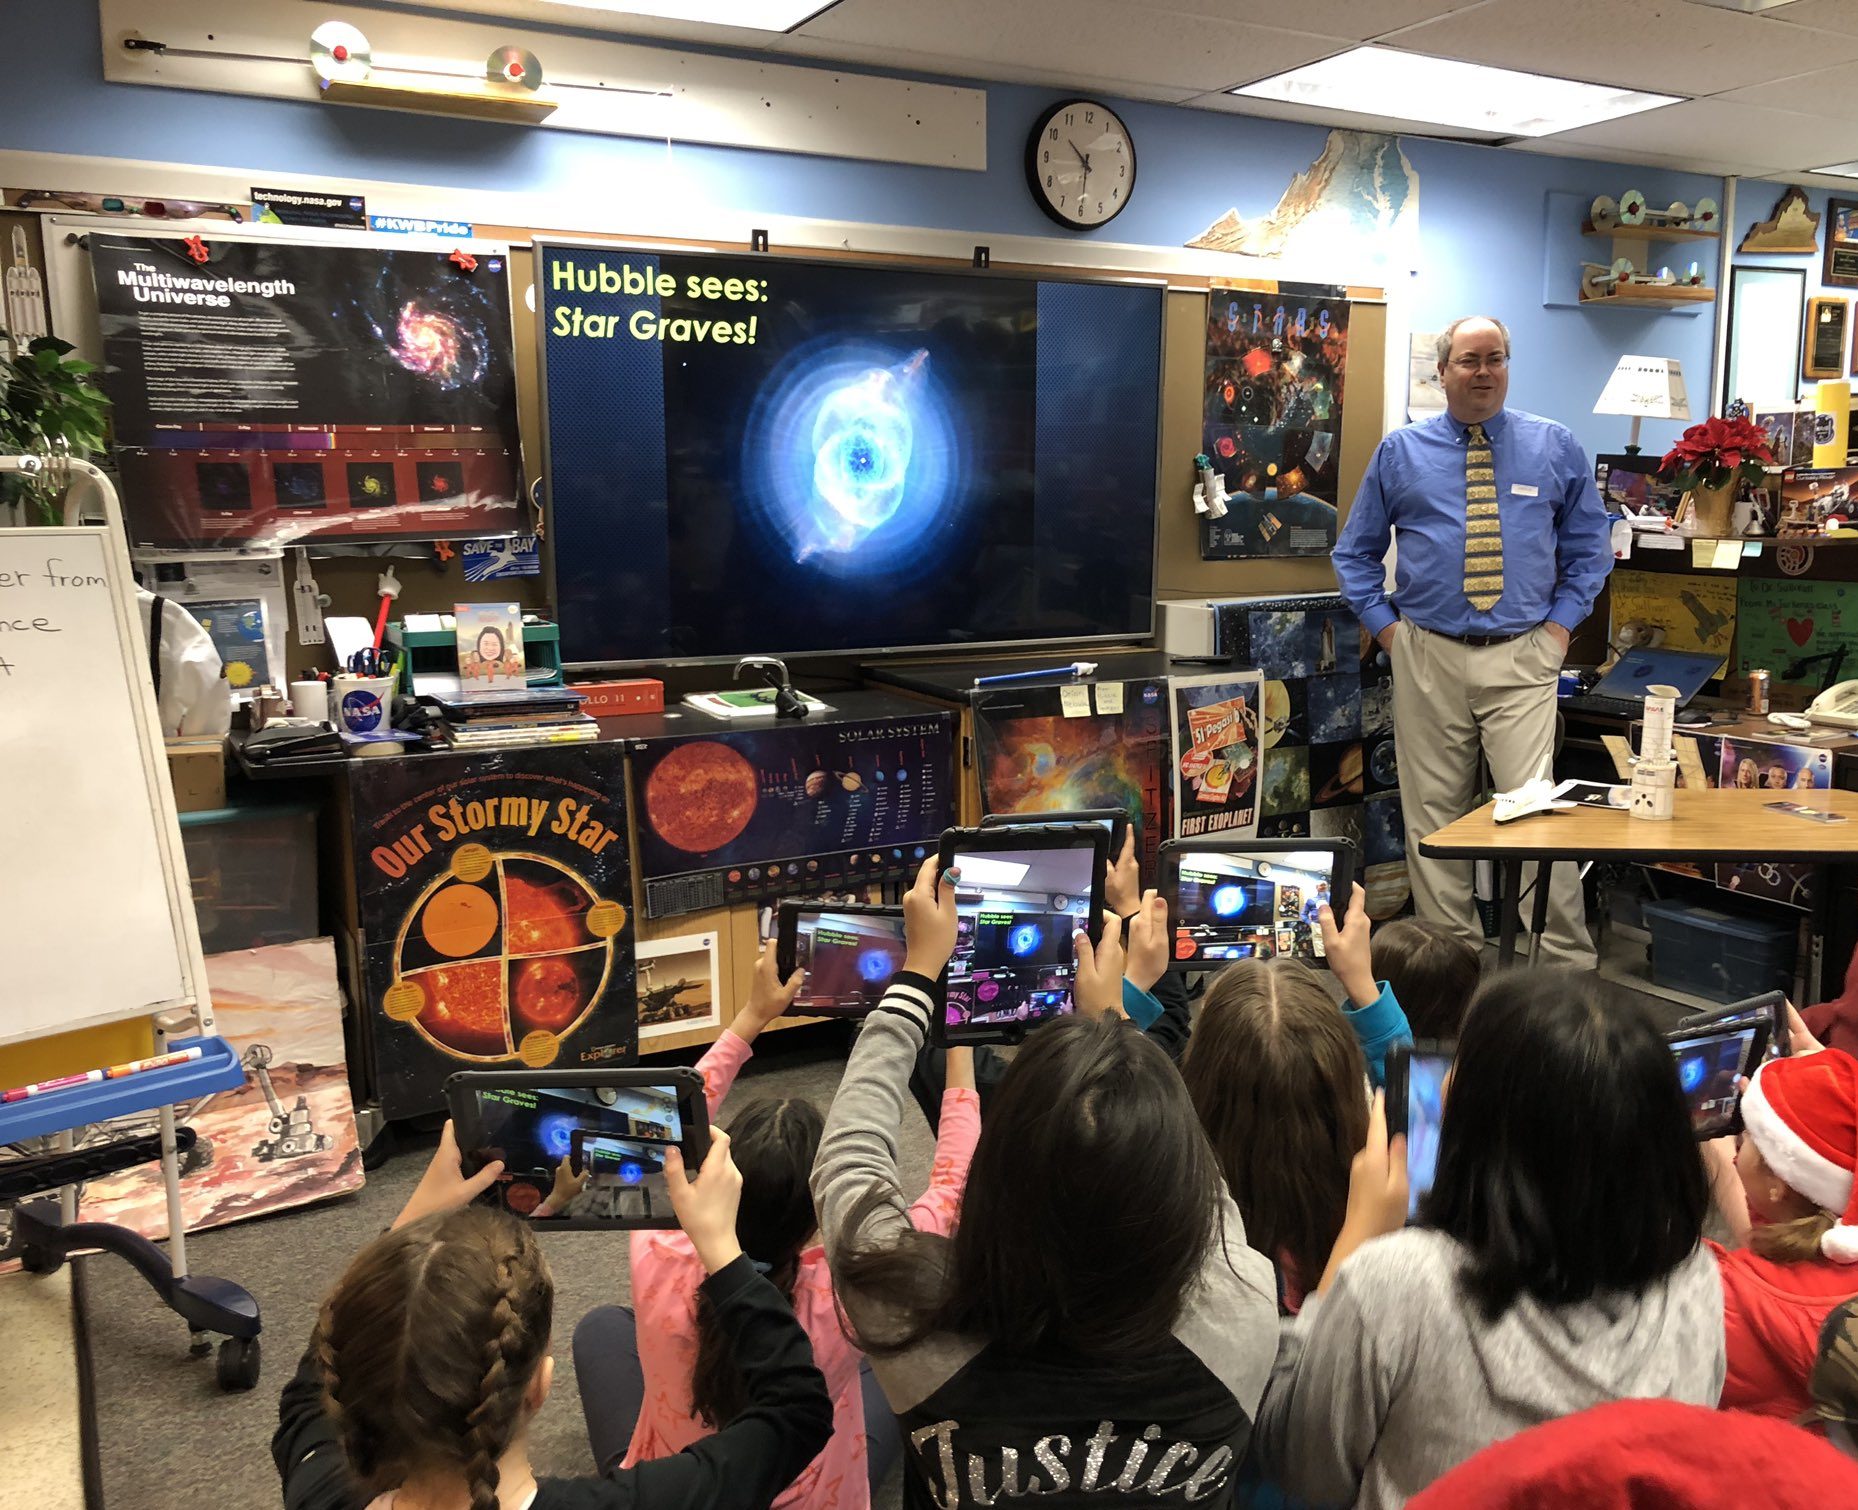 Middle-school children seated on the floor of a classroom point tablets toward a Hubble image of the Cat's Eye Nebula on a large screen in the front of the classroom. A Hubble scientist stands next to the screen discussing the image. The walls and nearby desks are covered with space and astronomy images.